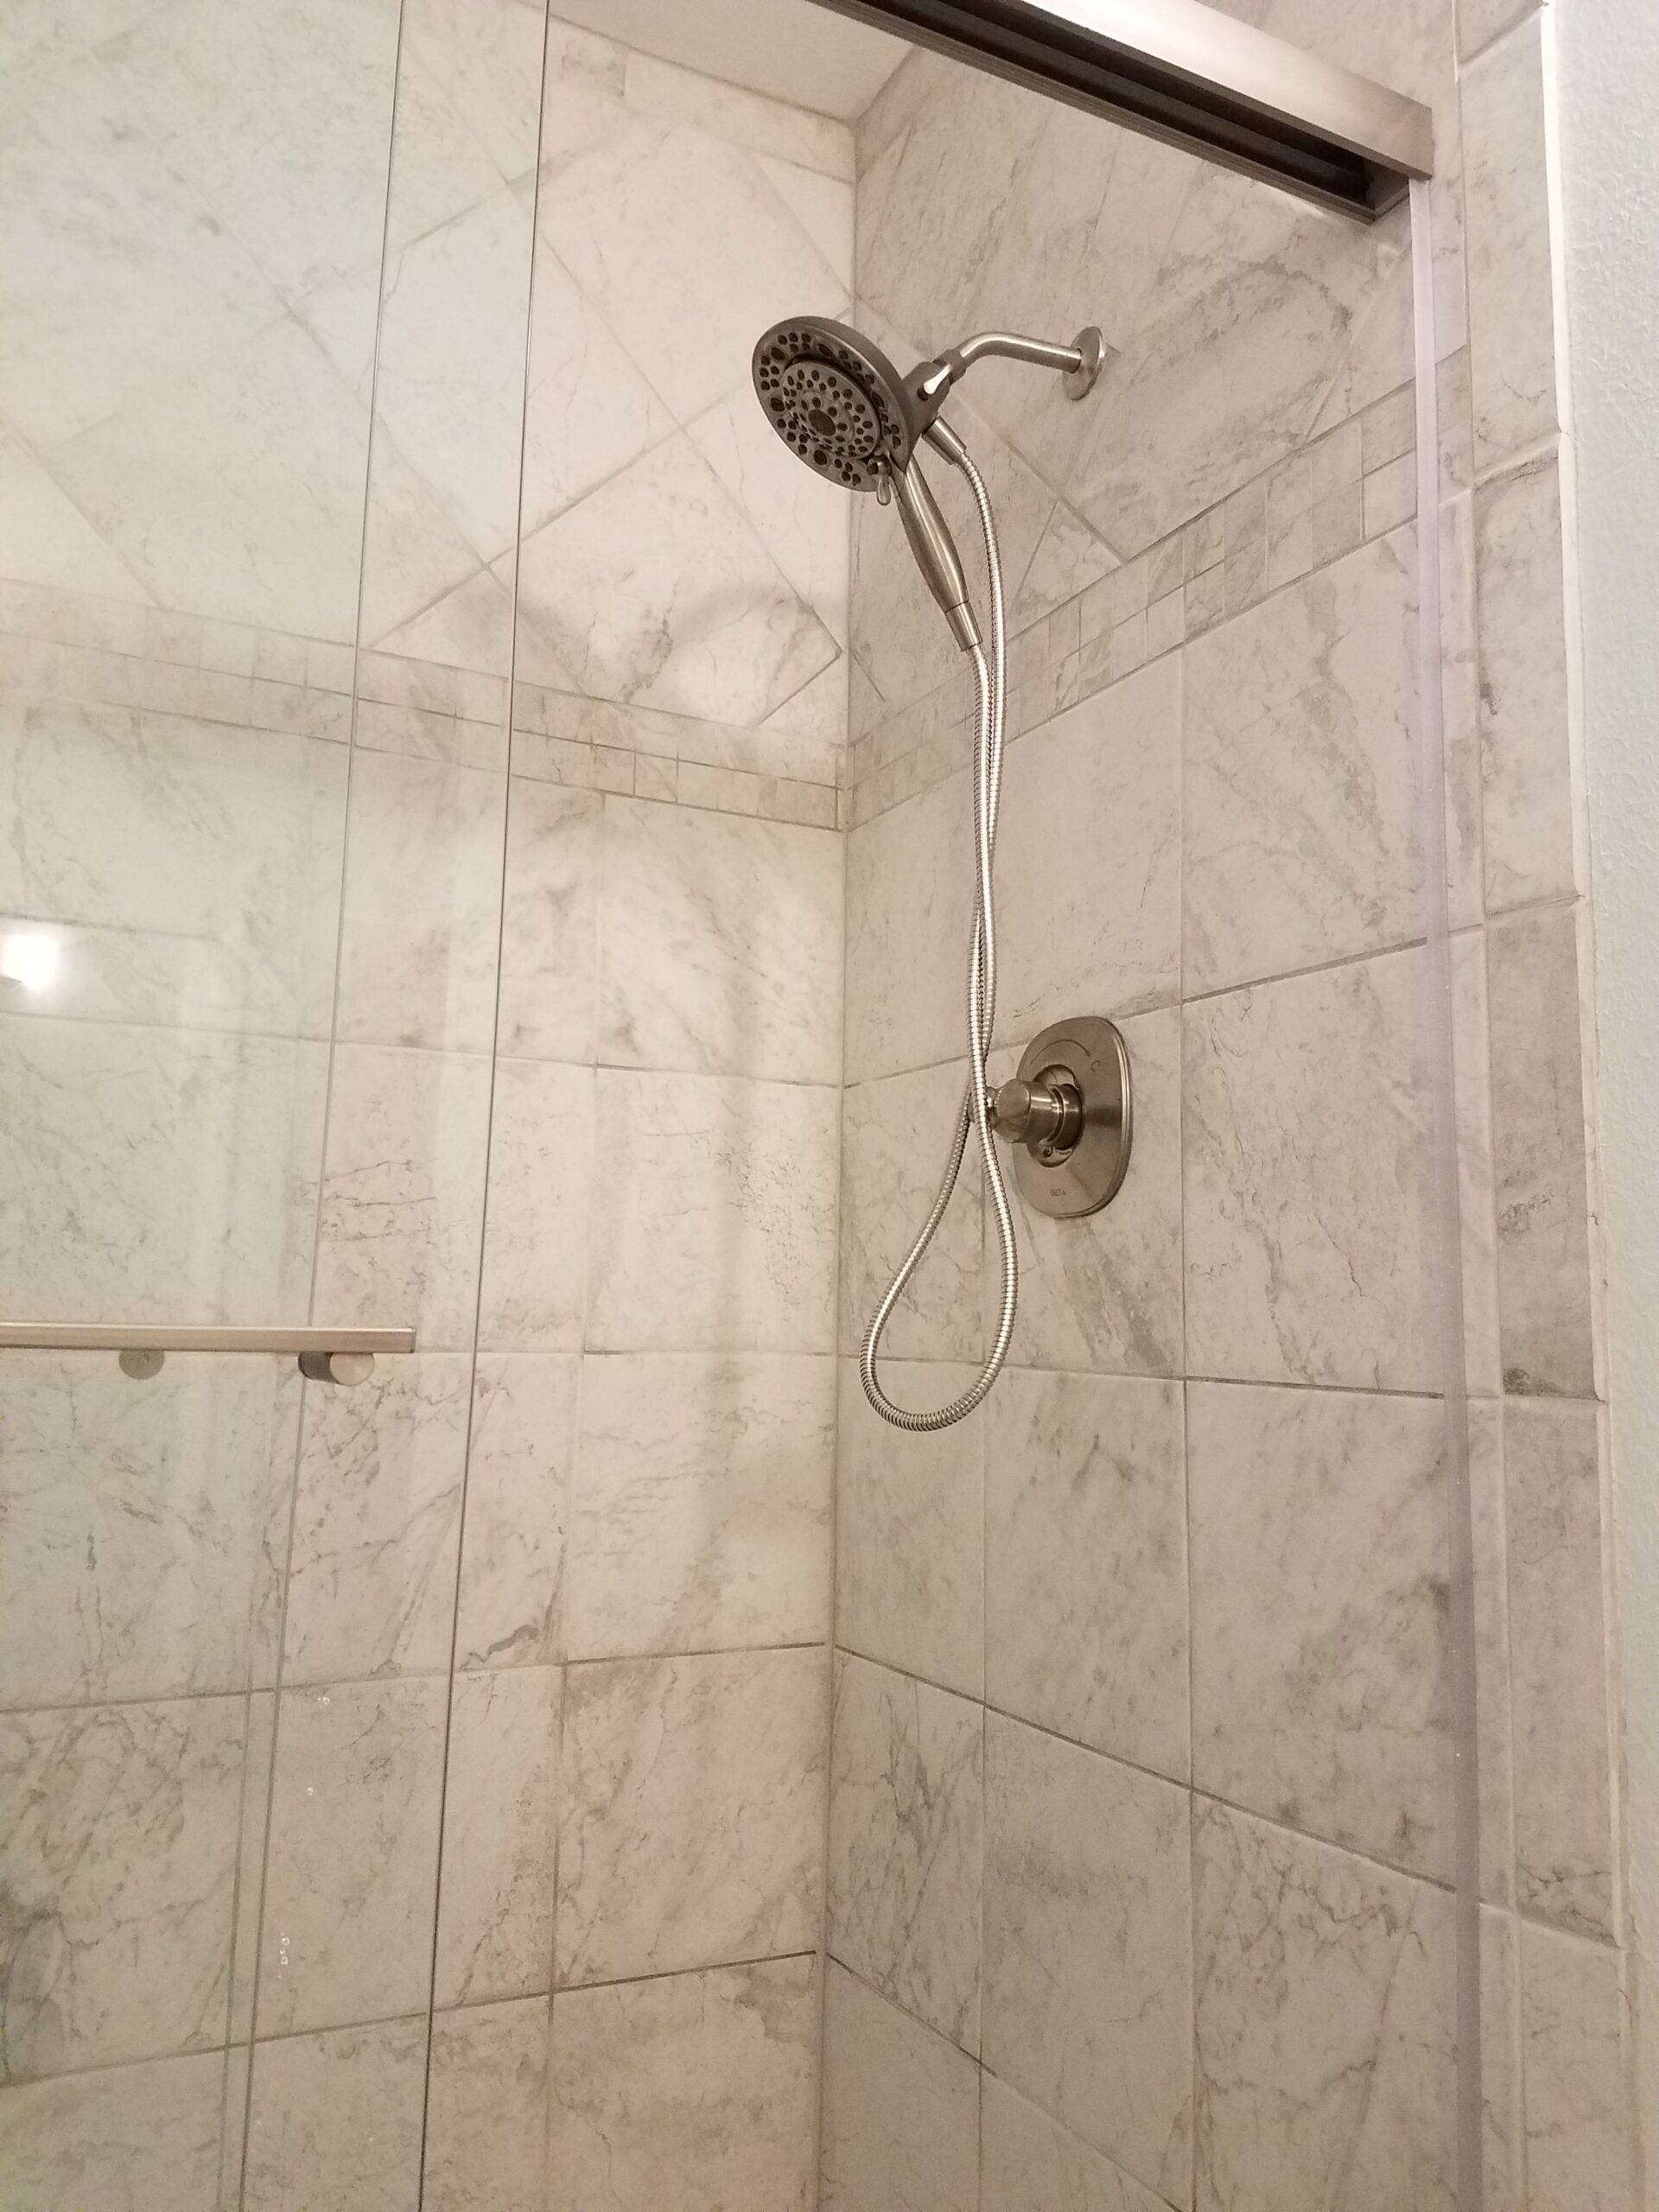 image showing shower head